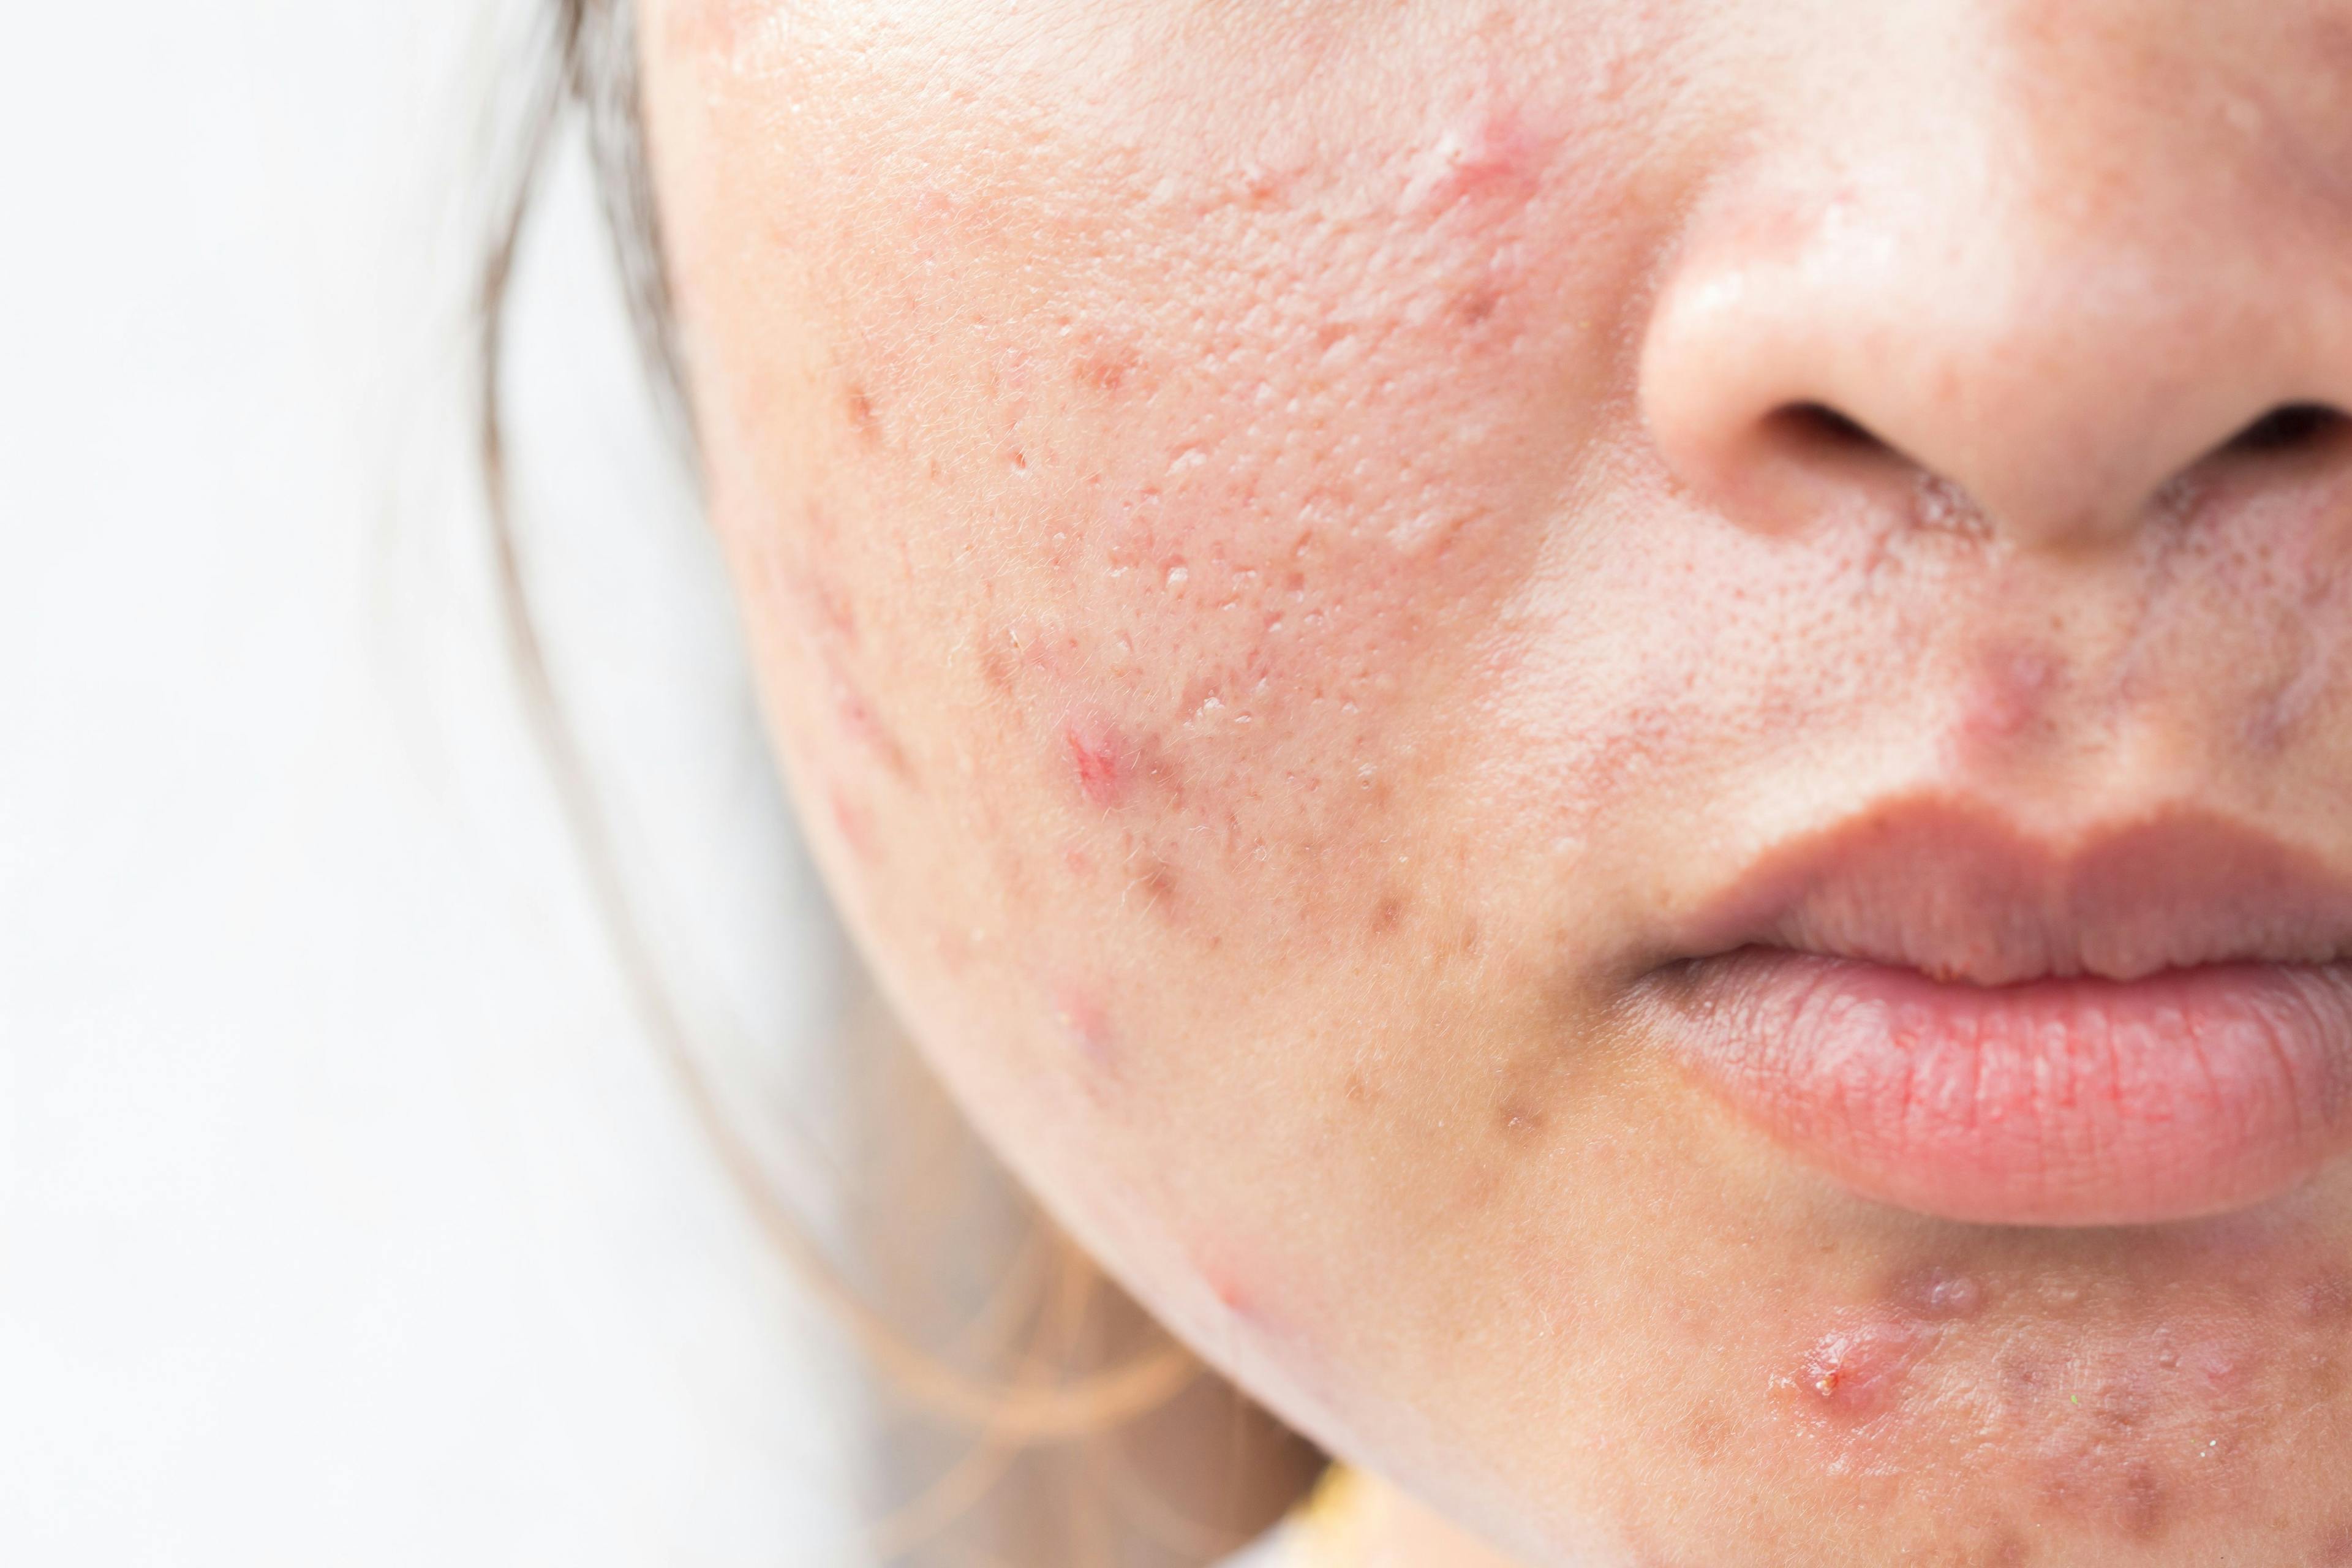  Does diet really play a role in acne?